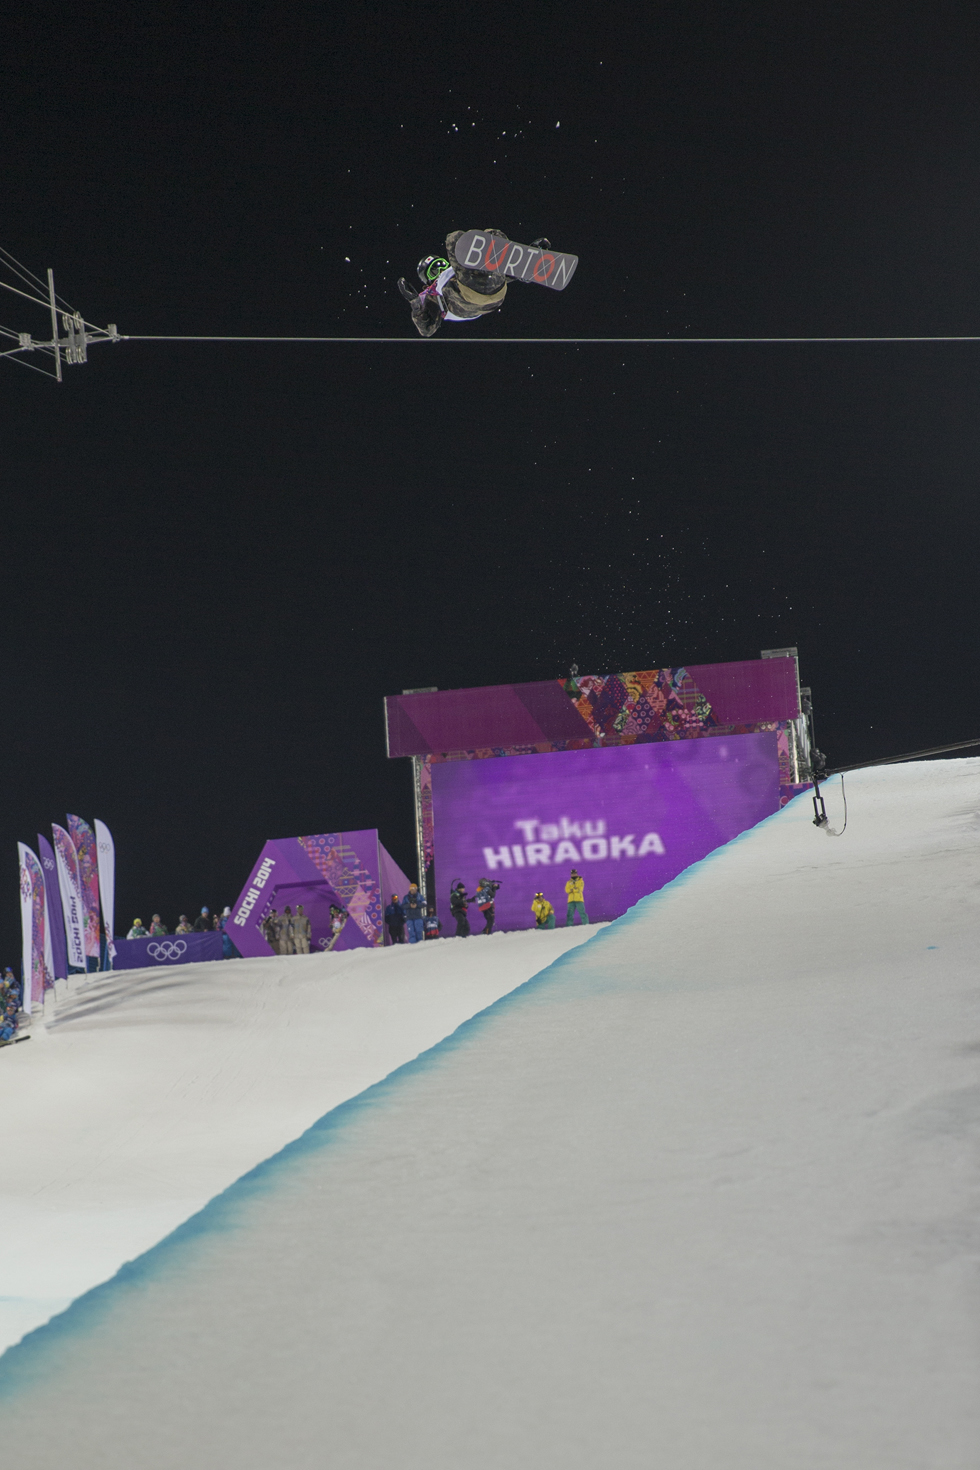 Russia Winter Olympics February 9,womans slopes style final snowboarder Jessika Jenson on the rails at top of course